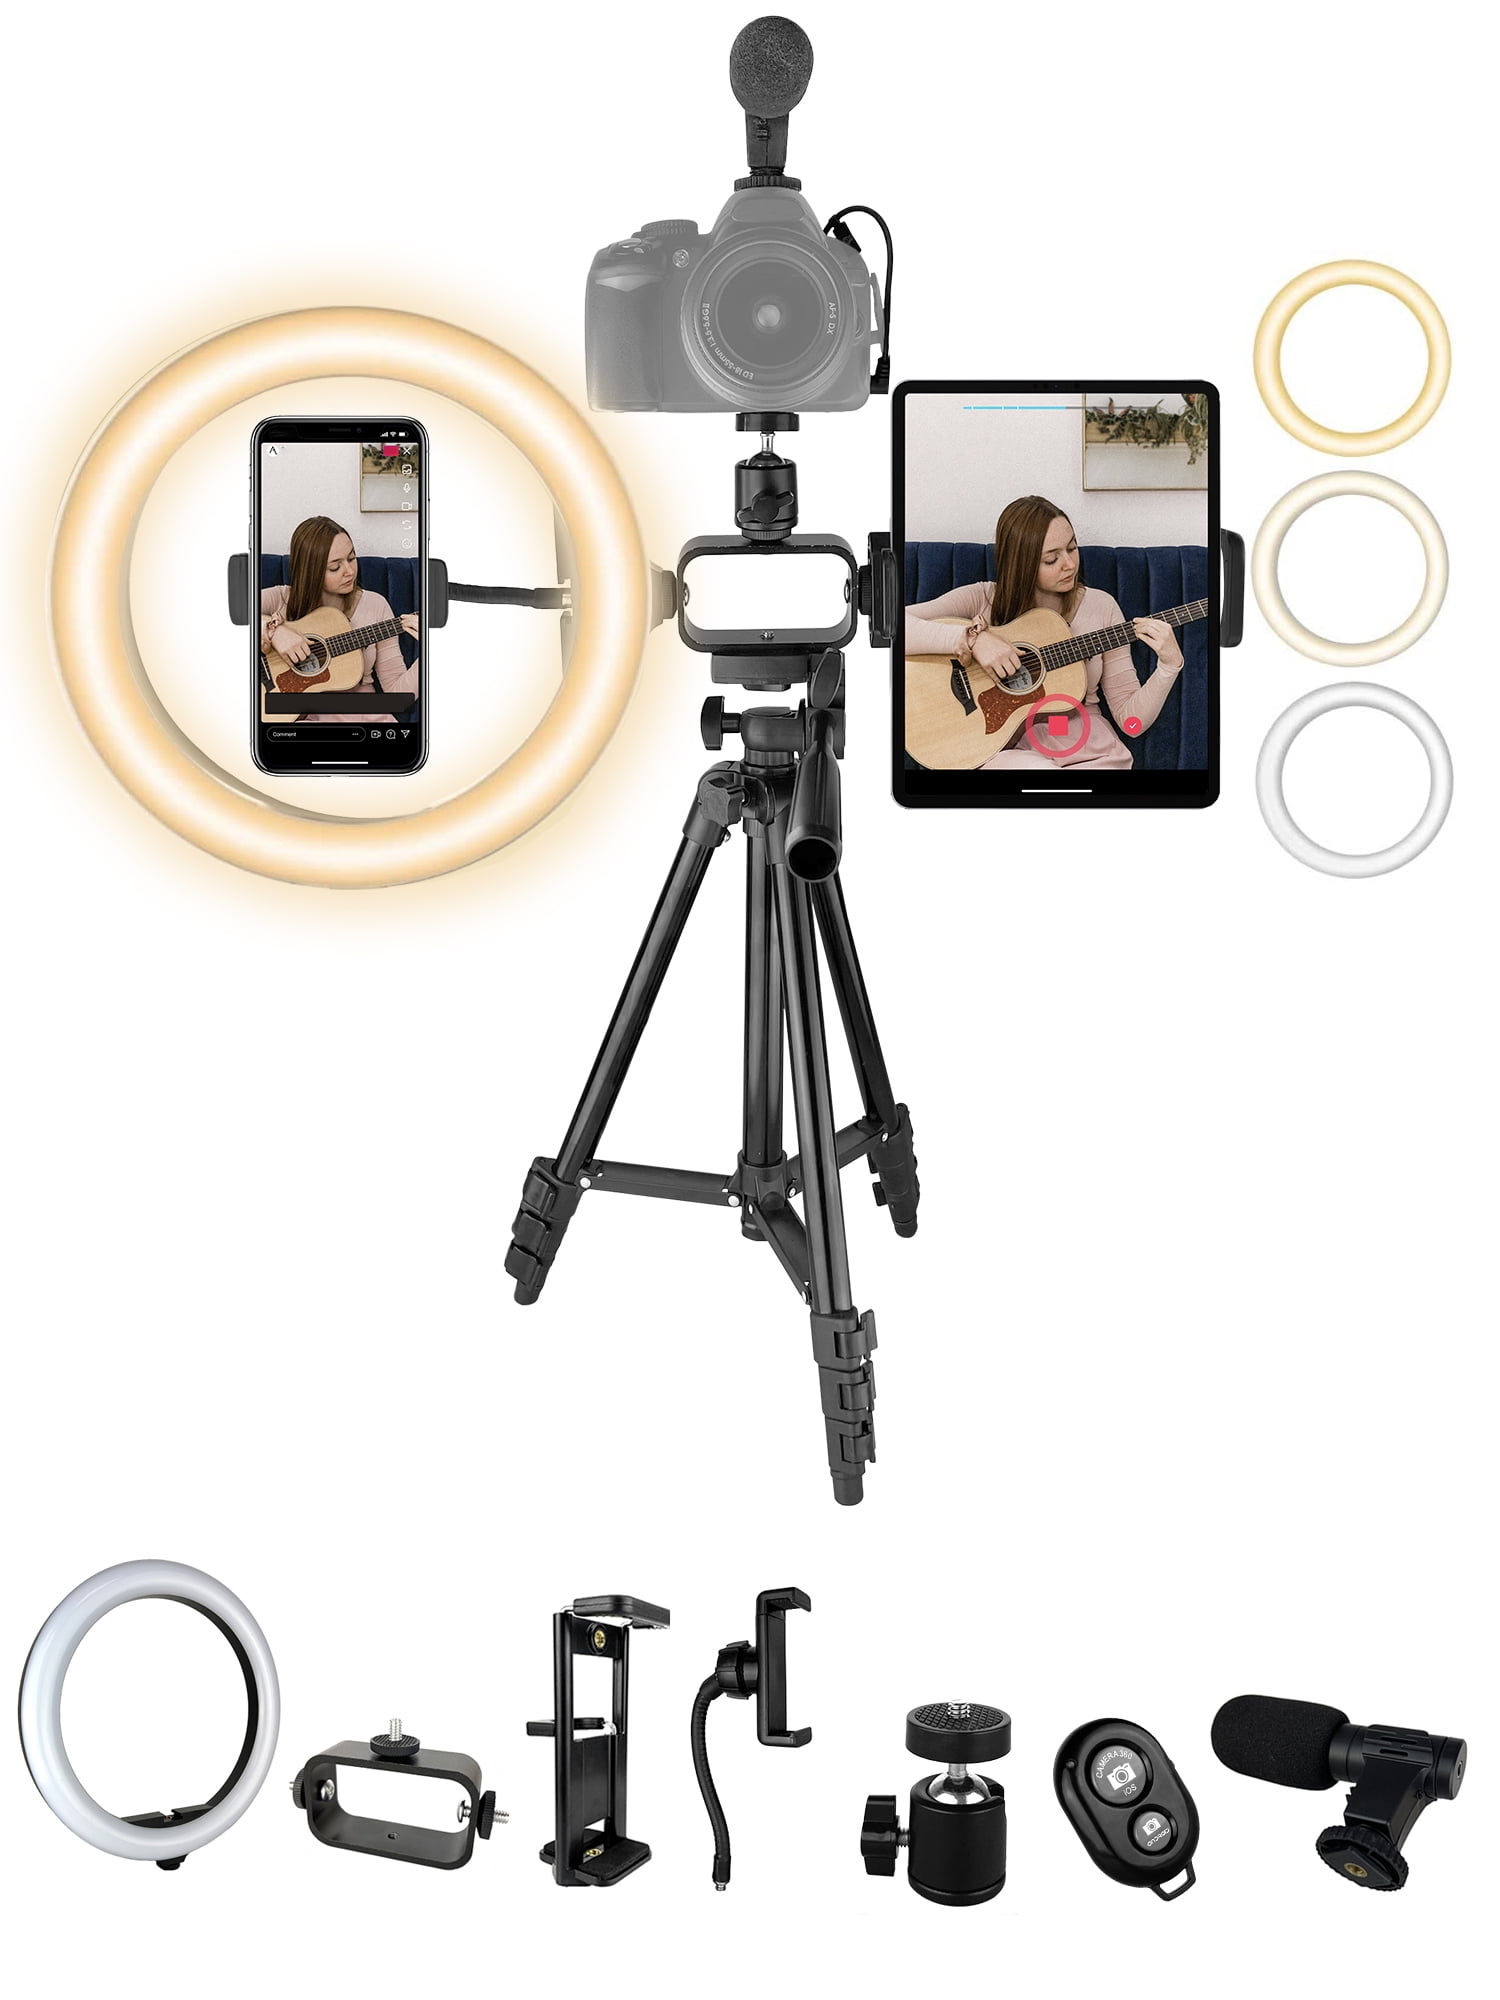 Adjustable Holder Tripod Attachment Setup for Live Streaming,Video Recording 